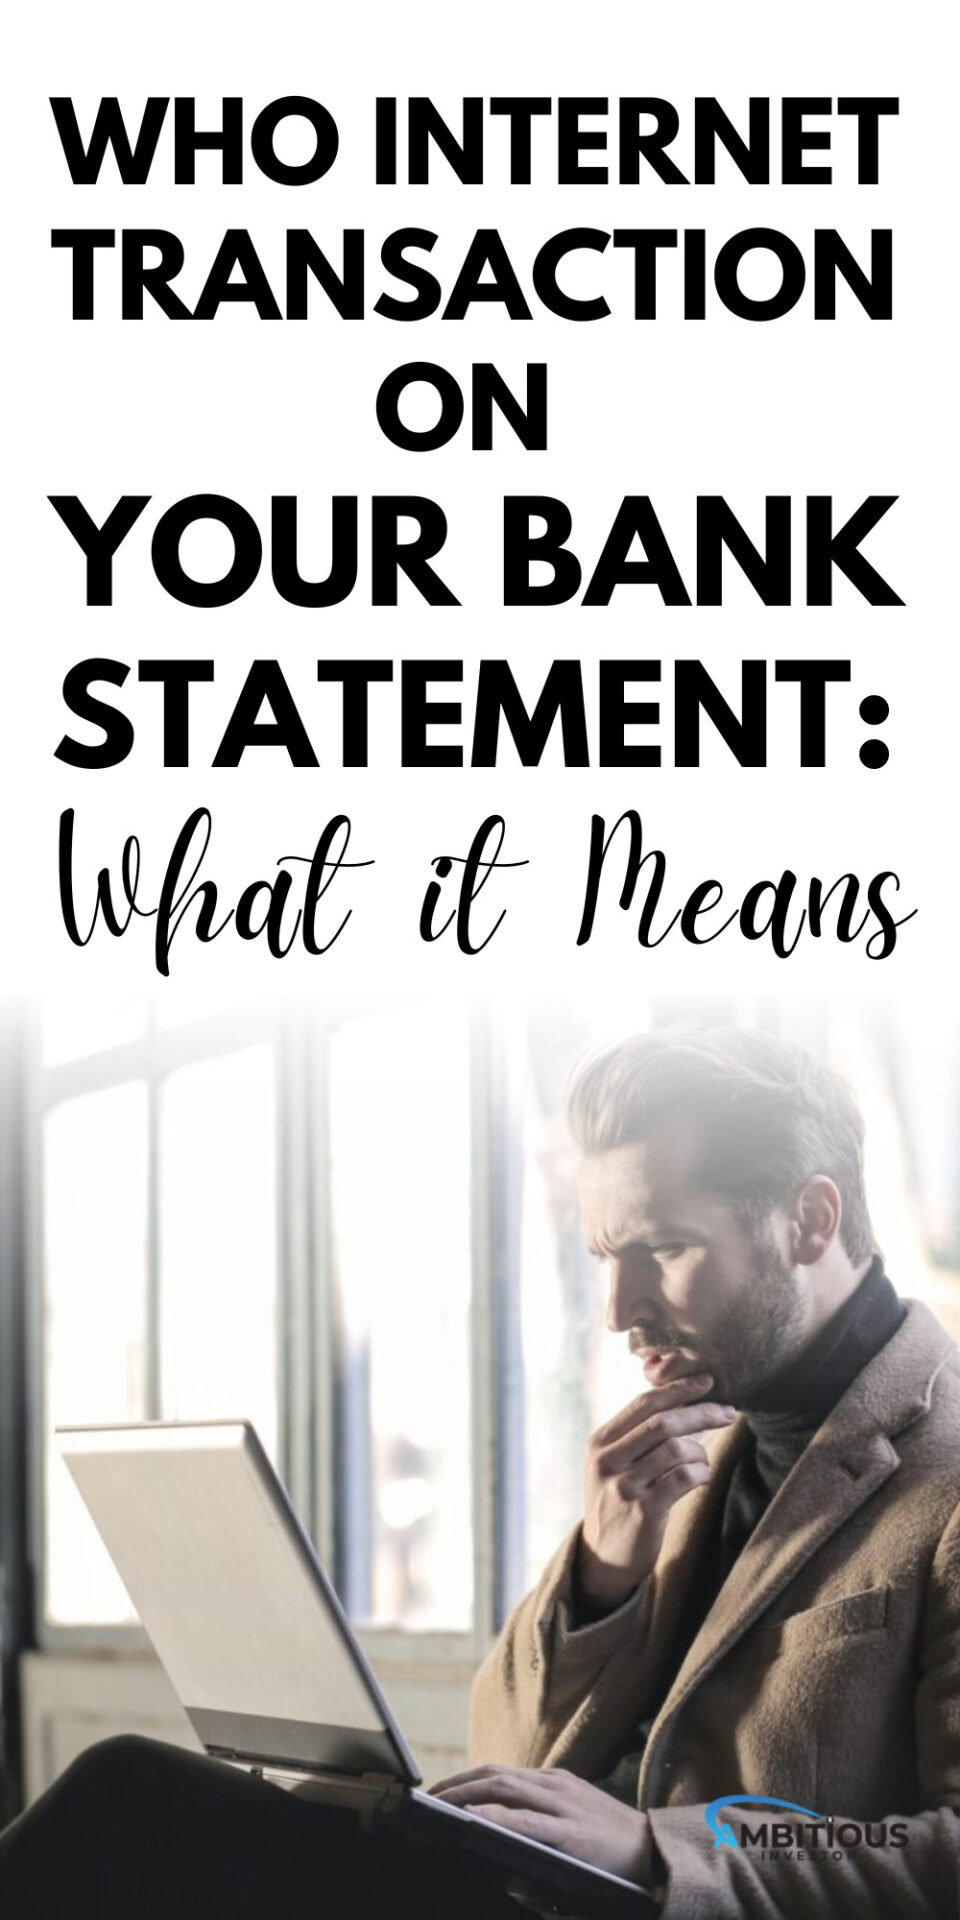 WHO Internet Transaction on Your Bank Statement – What it Means?